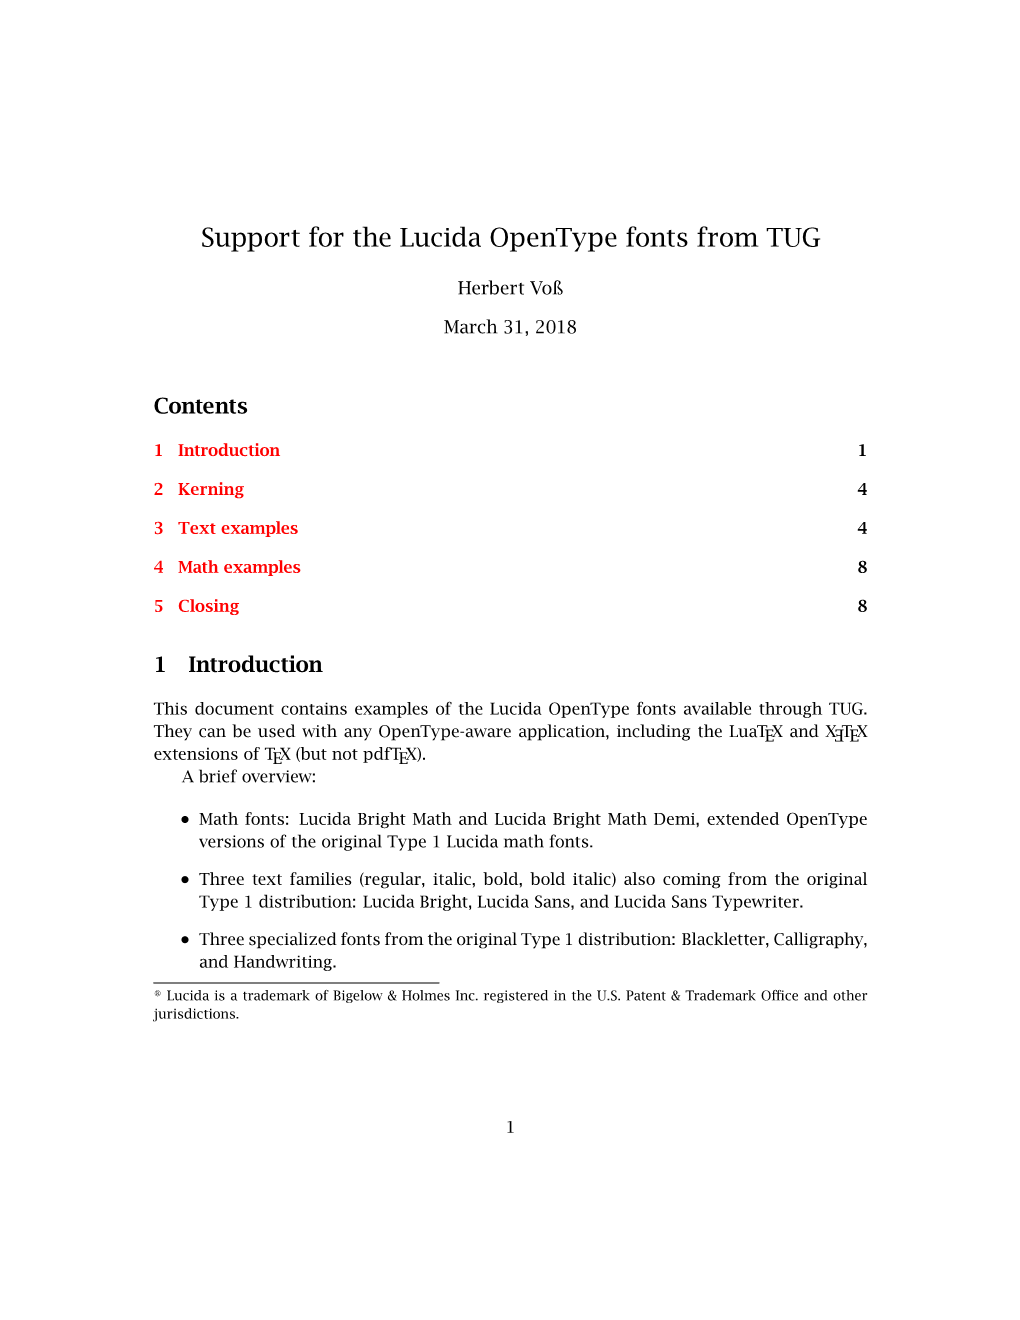 Support for the Lucida Opentype Fonts from TUG